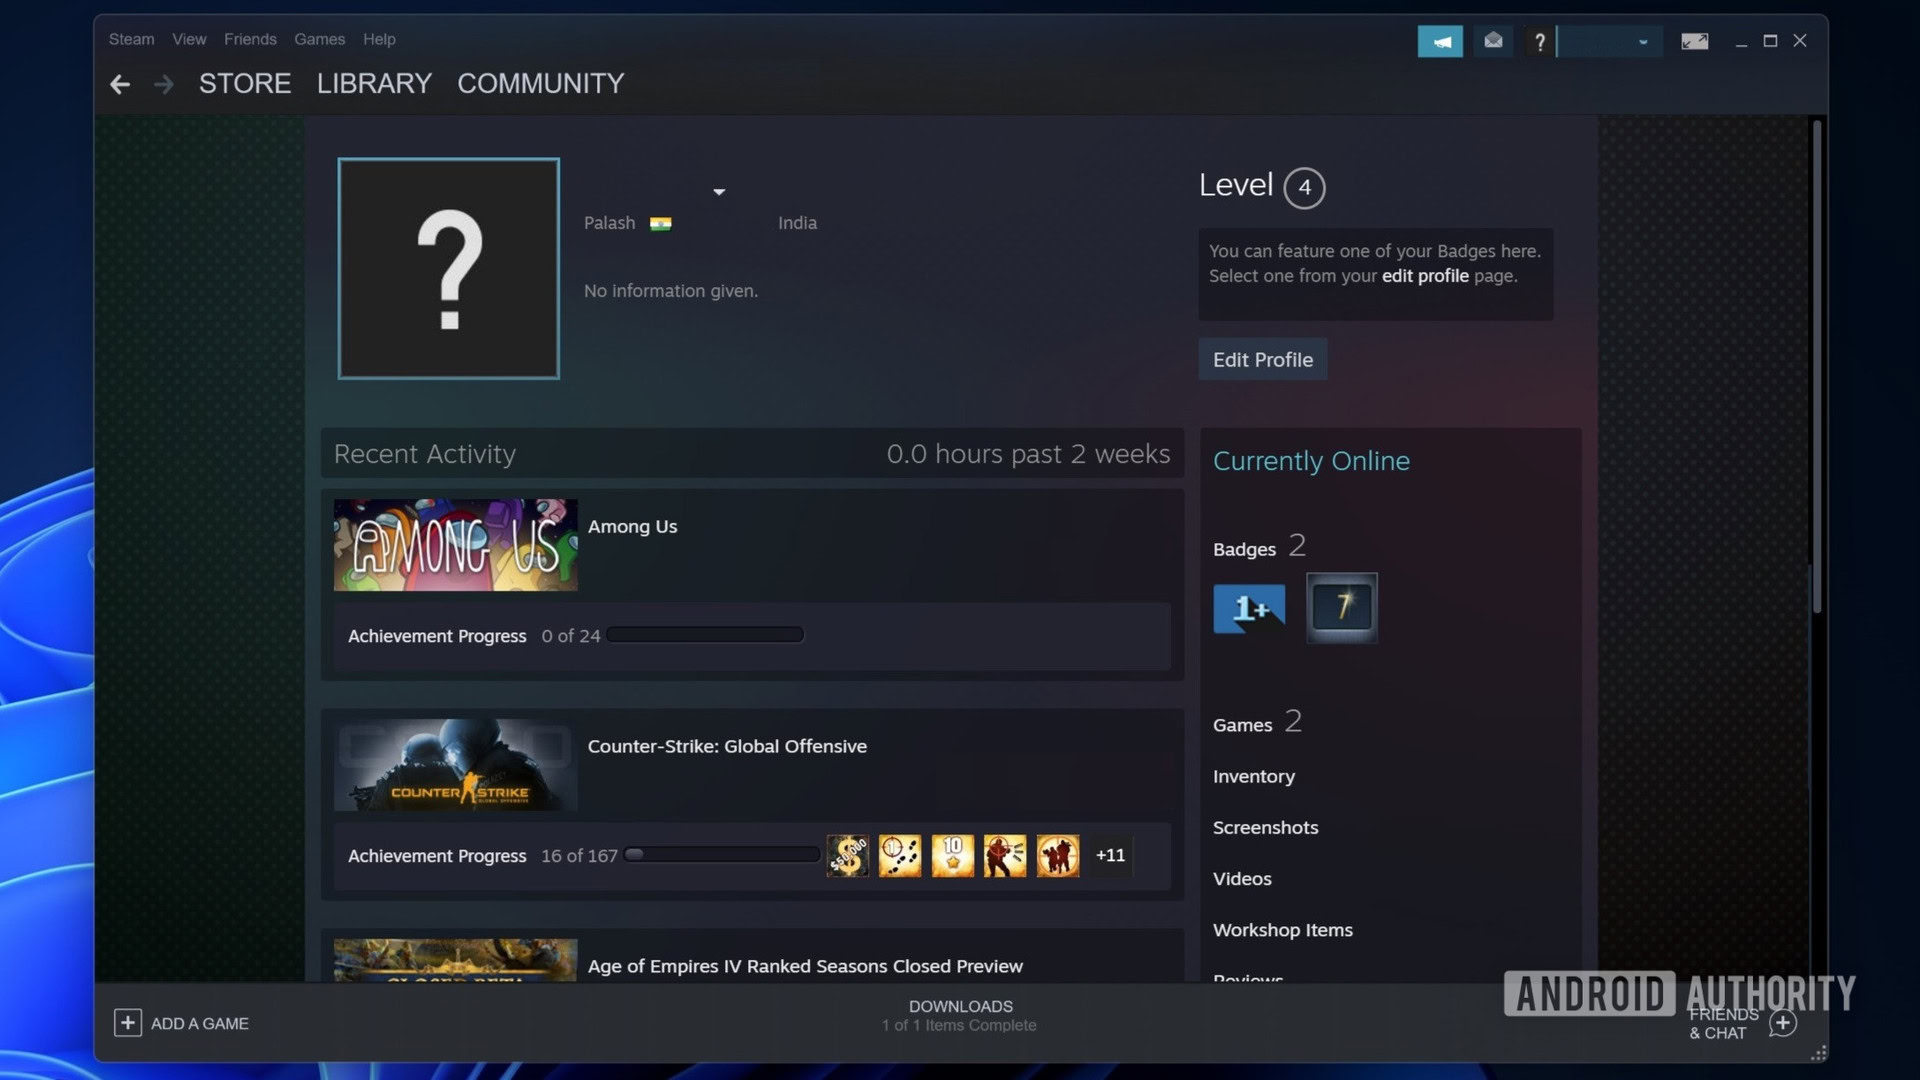 How to earn achievements on steam фото 71